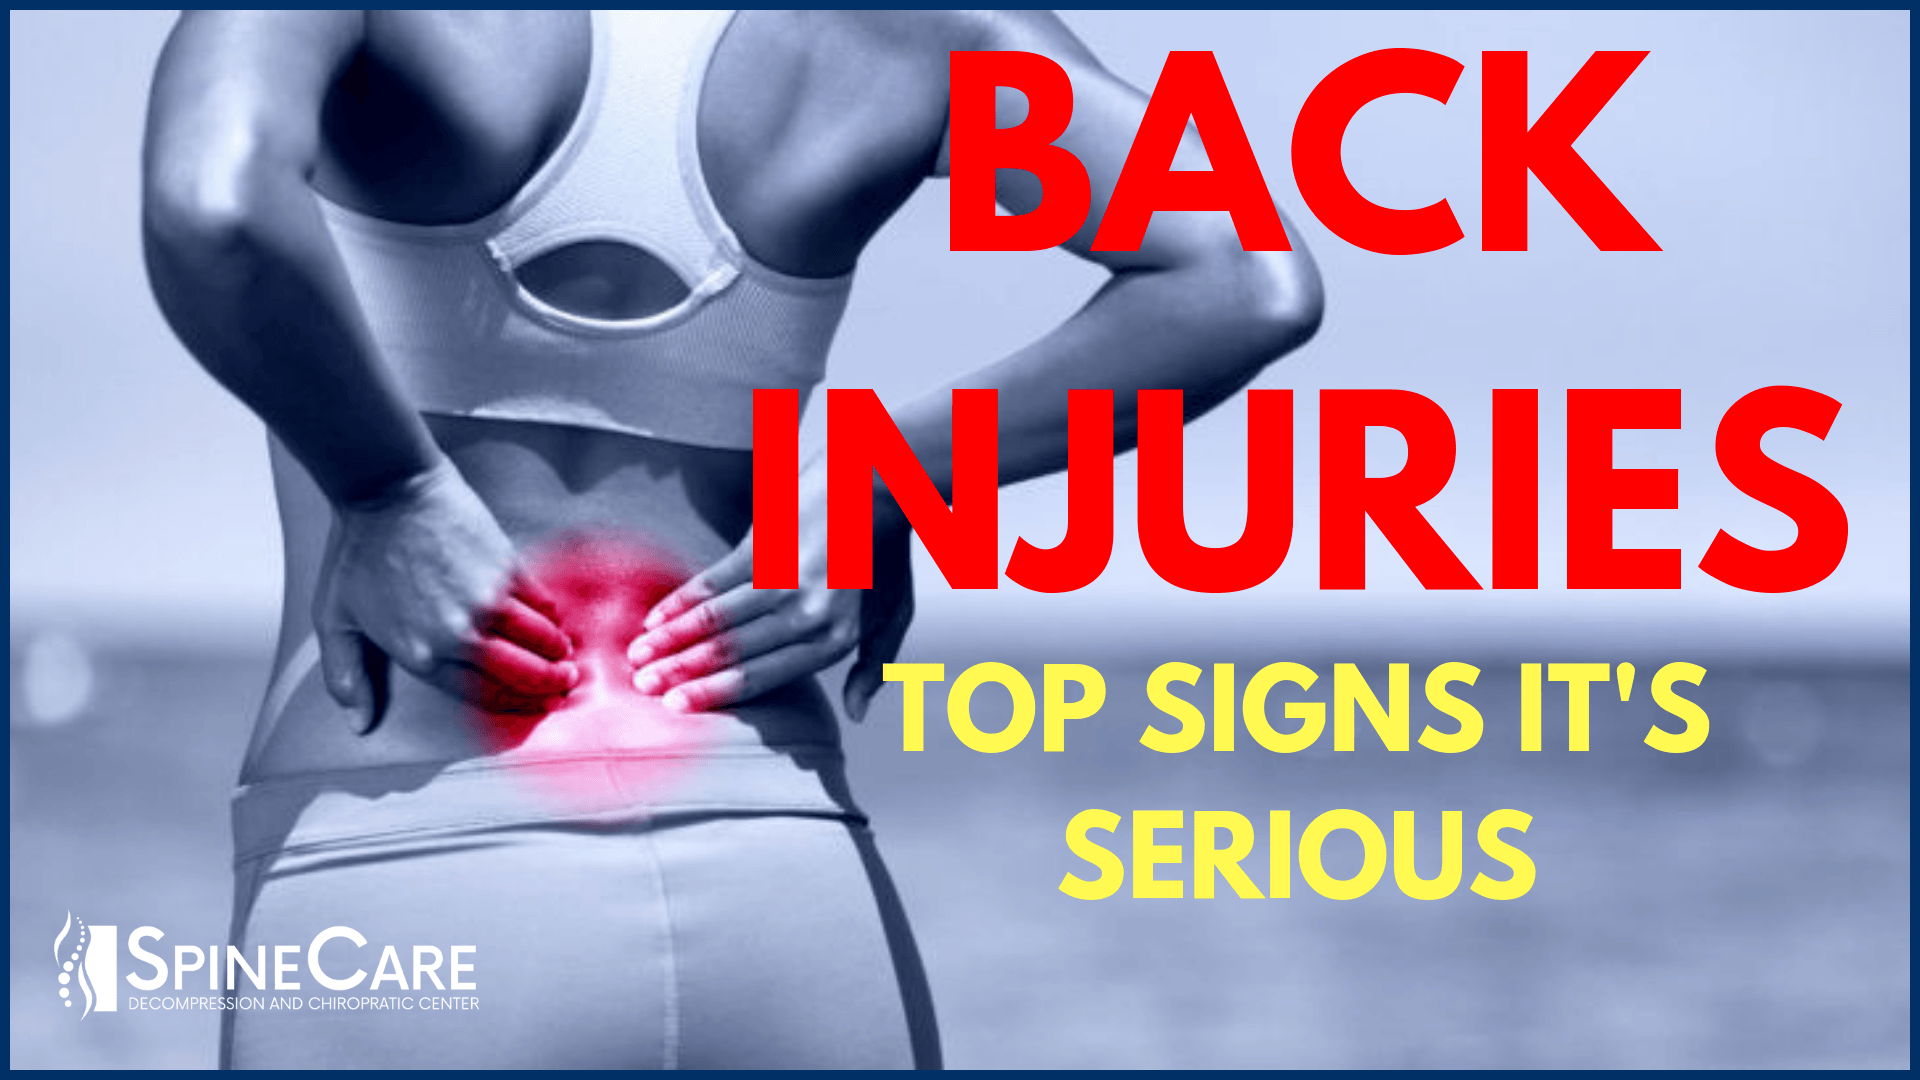 How Do You Know If Your Low Back Injury Is Serious?